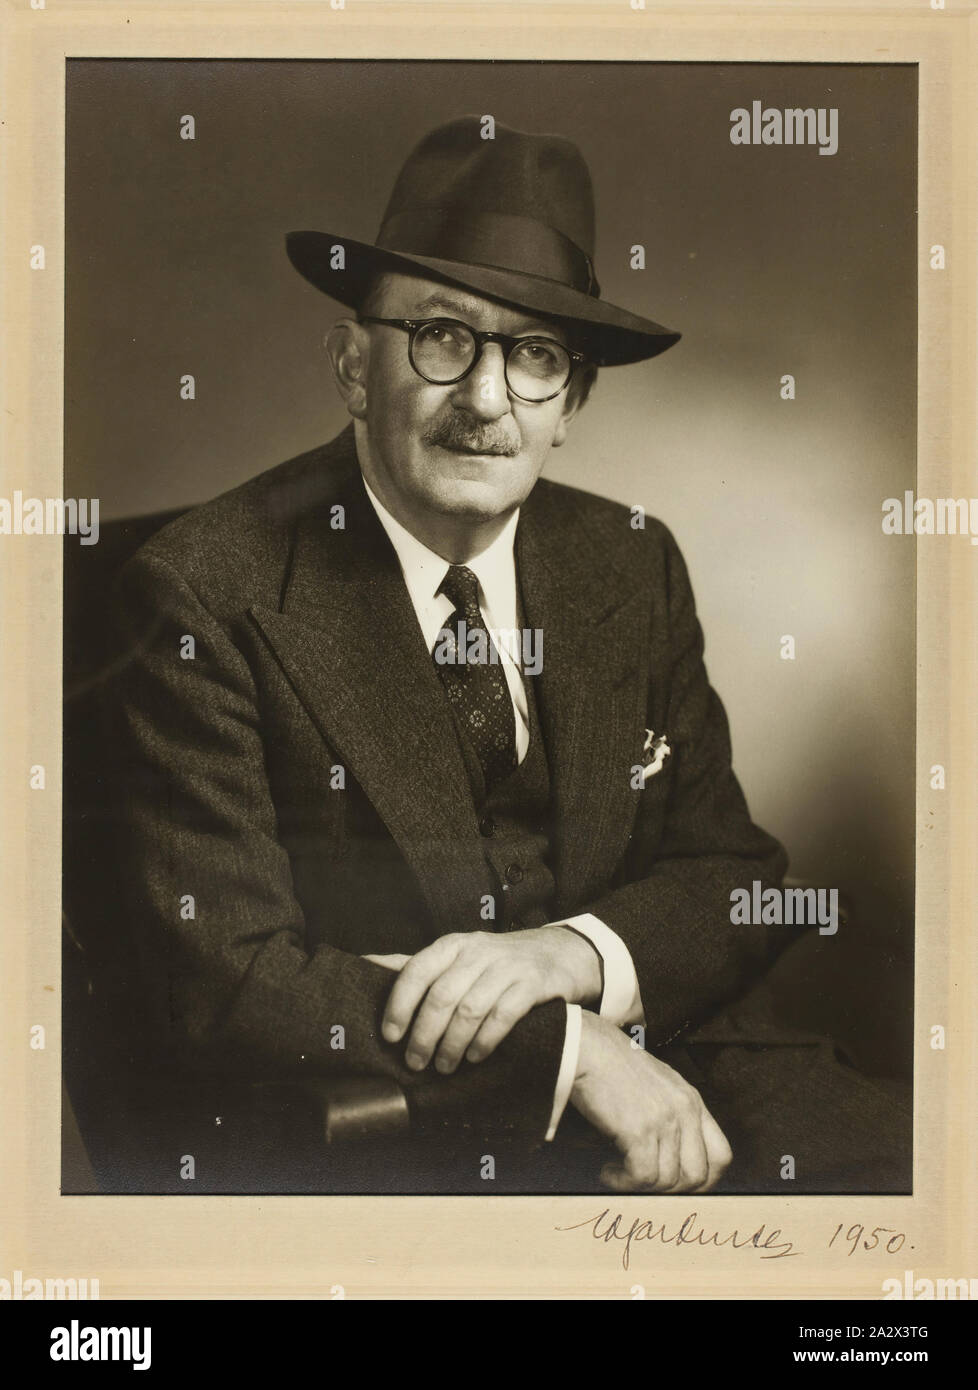 Photograph, Edgar Rouse, Melbourne, 1950, Photograph of Edgar Rouse, Chairman of Kodak Australasia Pty Ltd, Melbourne,1950. collection of products, promotional materials, photographs and working life artefacts, when the Melbourne manufacturing plant at Coburg closed down. manufactured and distributed a wide range of photographic products to Australasia, such Stock Photo